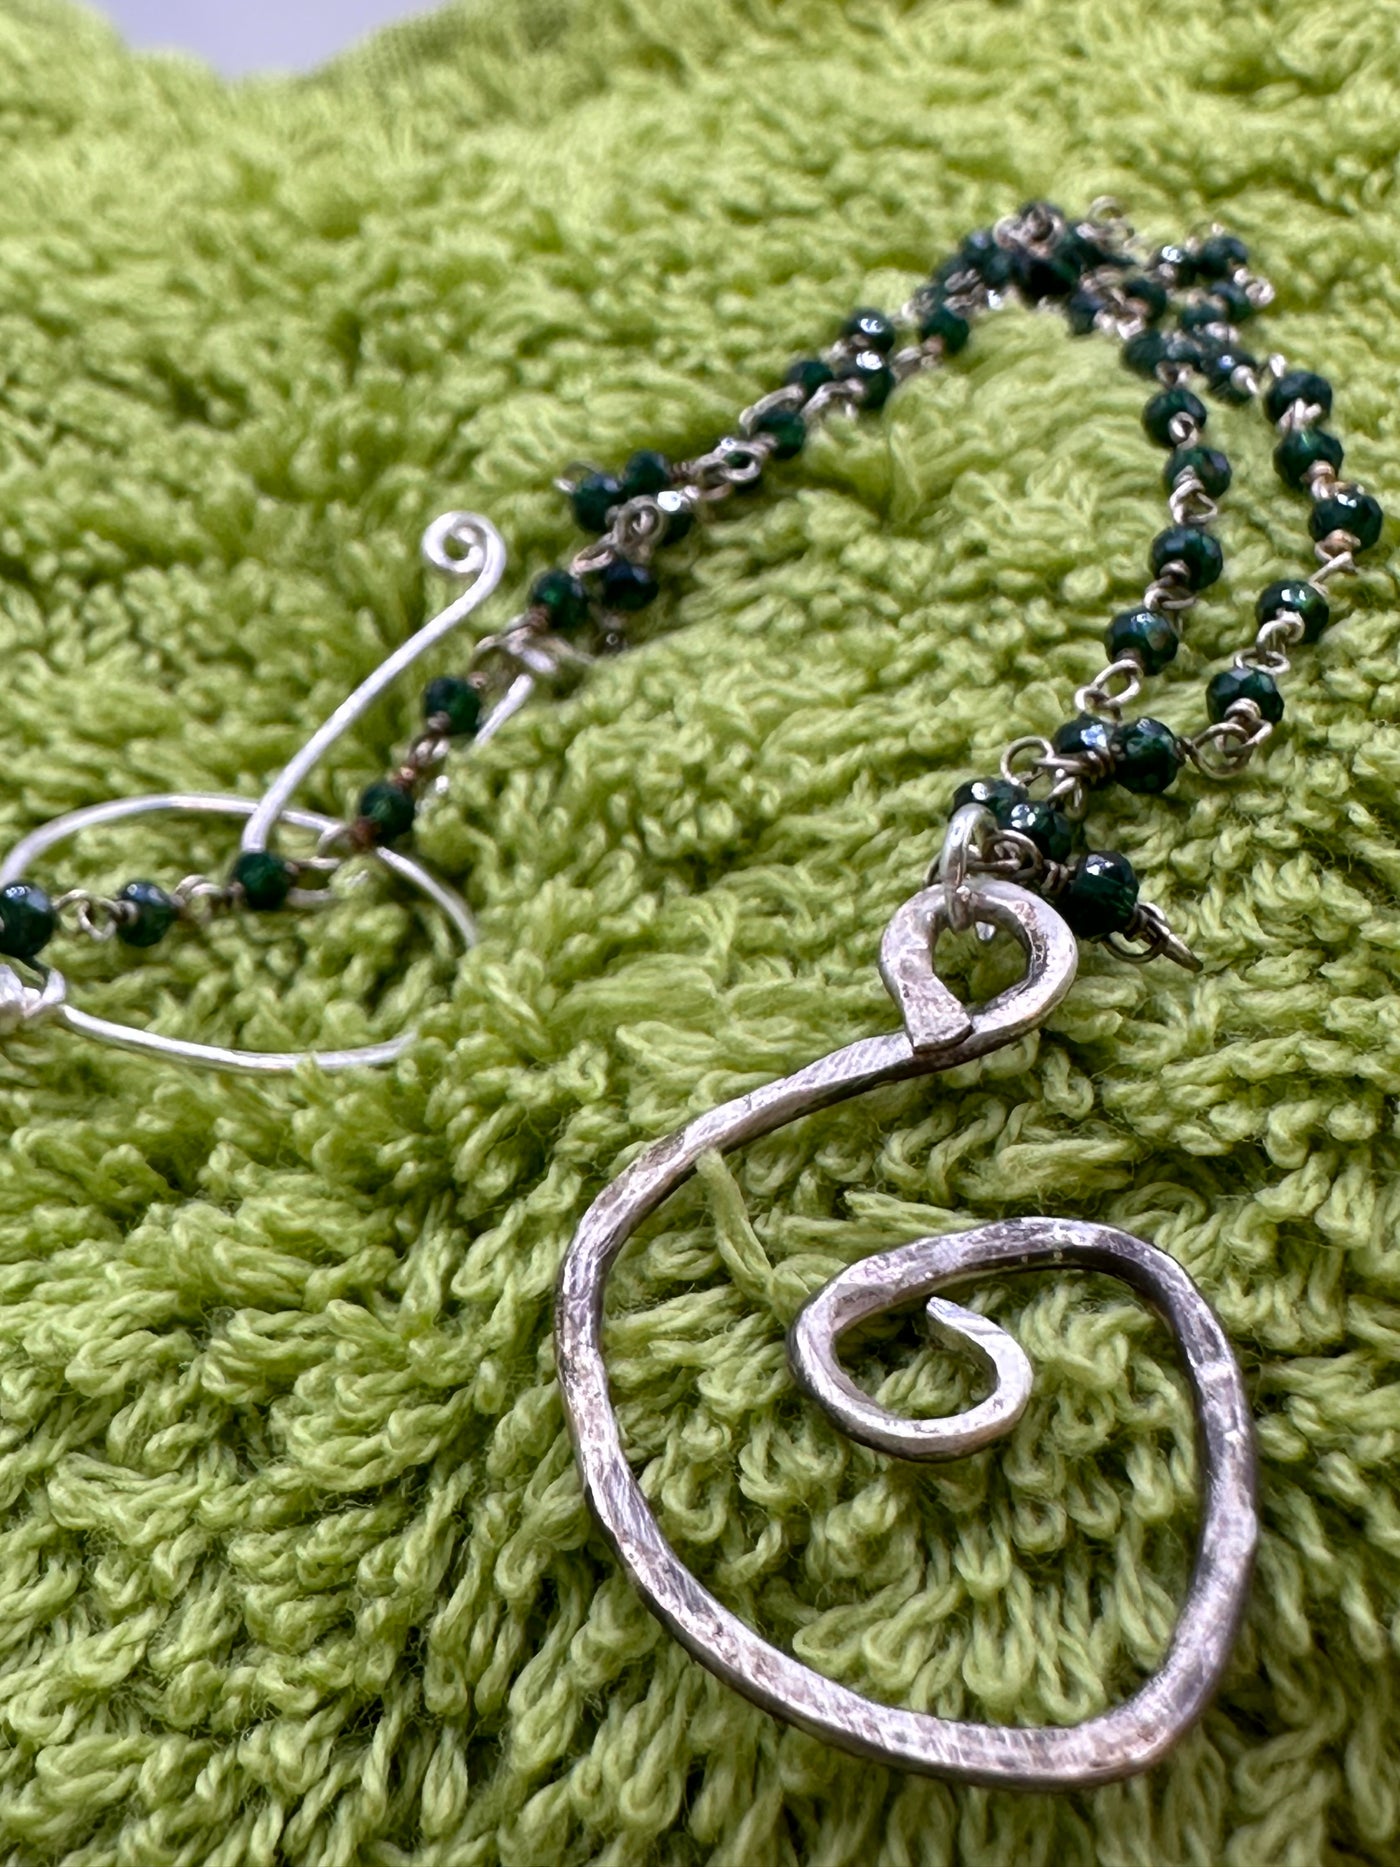 Silver and green beads with silver abstract pendant